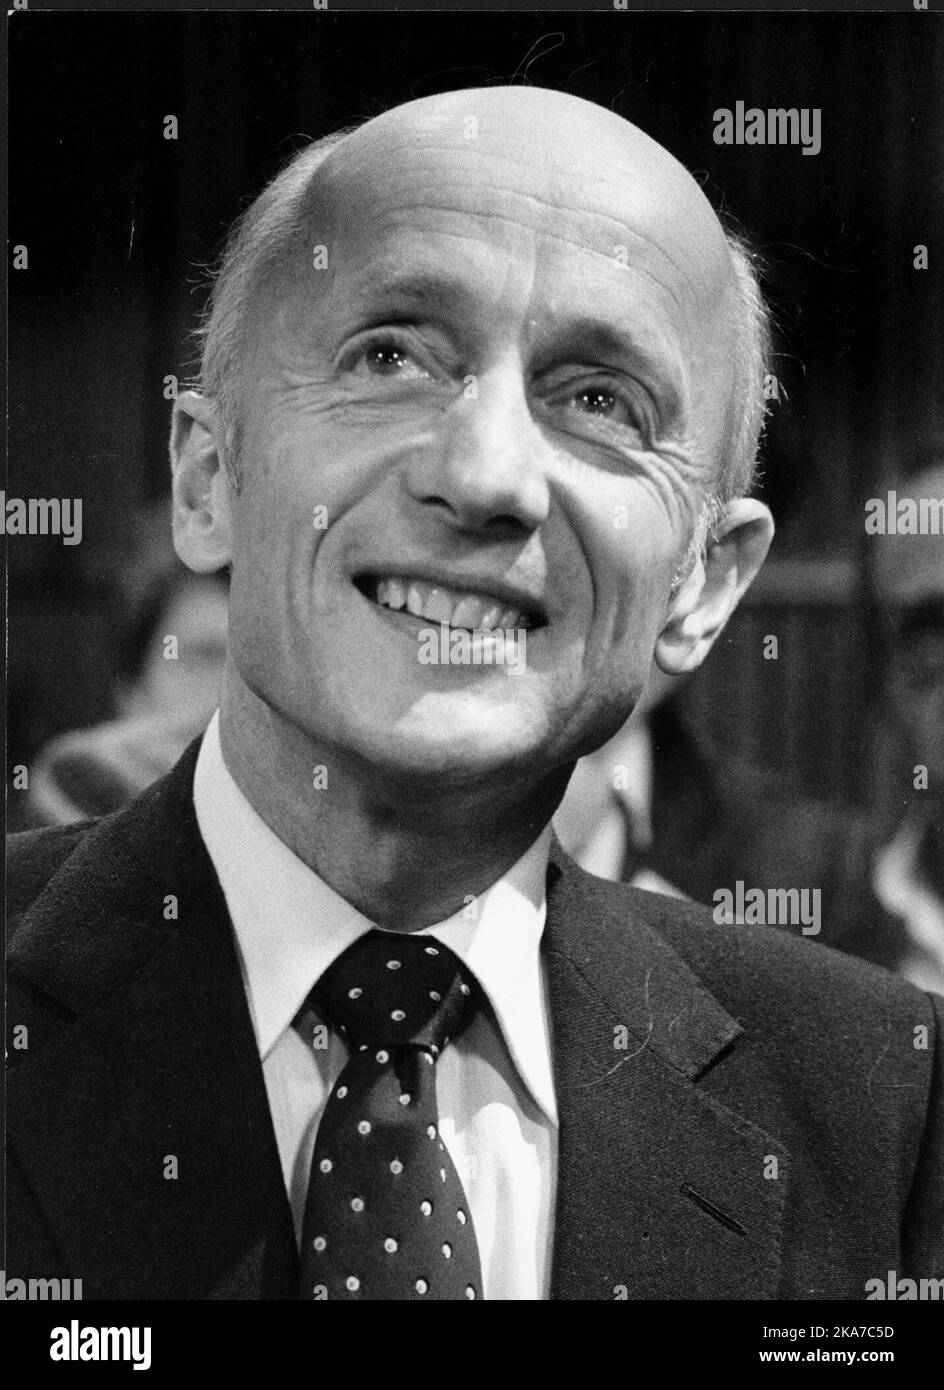 Former Prime Minister Kaare Willoch died today, des. 6th 2021. Oslo September 1981. KÃ¥re Willoch, smiling portrait, election night during the parliamentary elections. NTB archive photo / NTB  Stock Photo